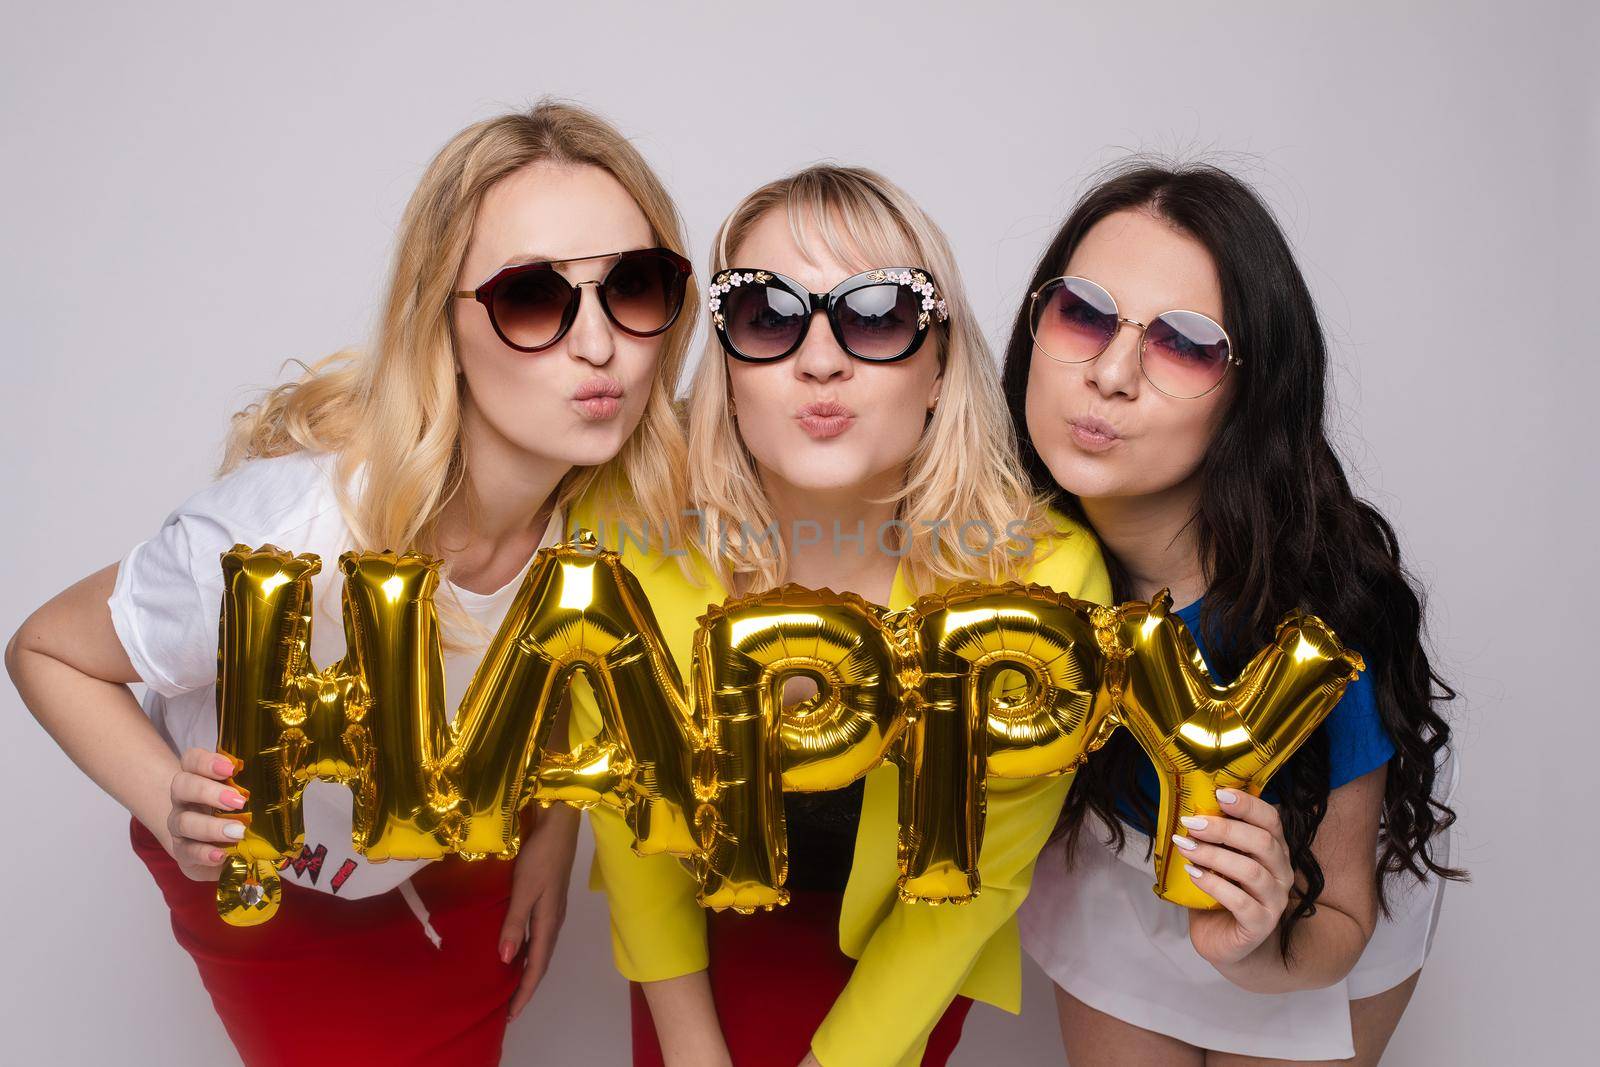 Group of stylish young woman wearing trendy sunglasses posing with big letters at white studio background medium shot. Happy adorable fashion girl having fun relaxing together enjoying friendship